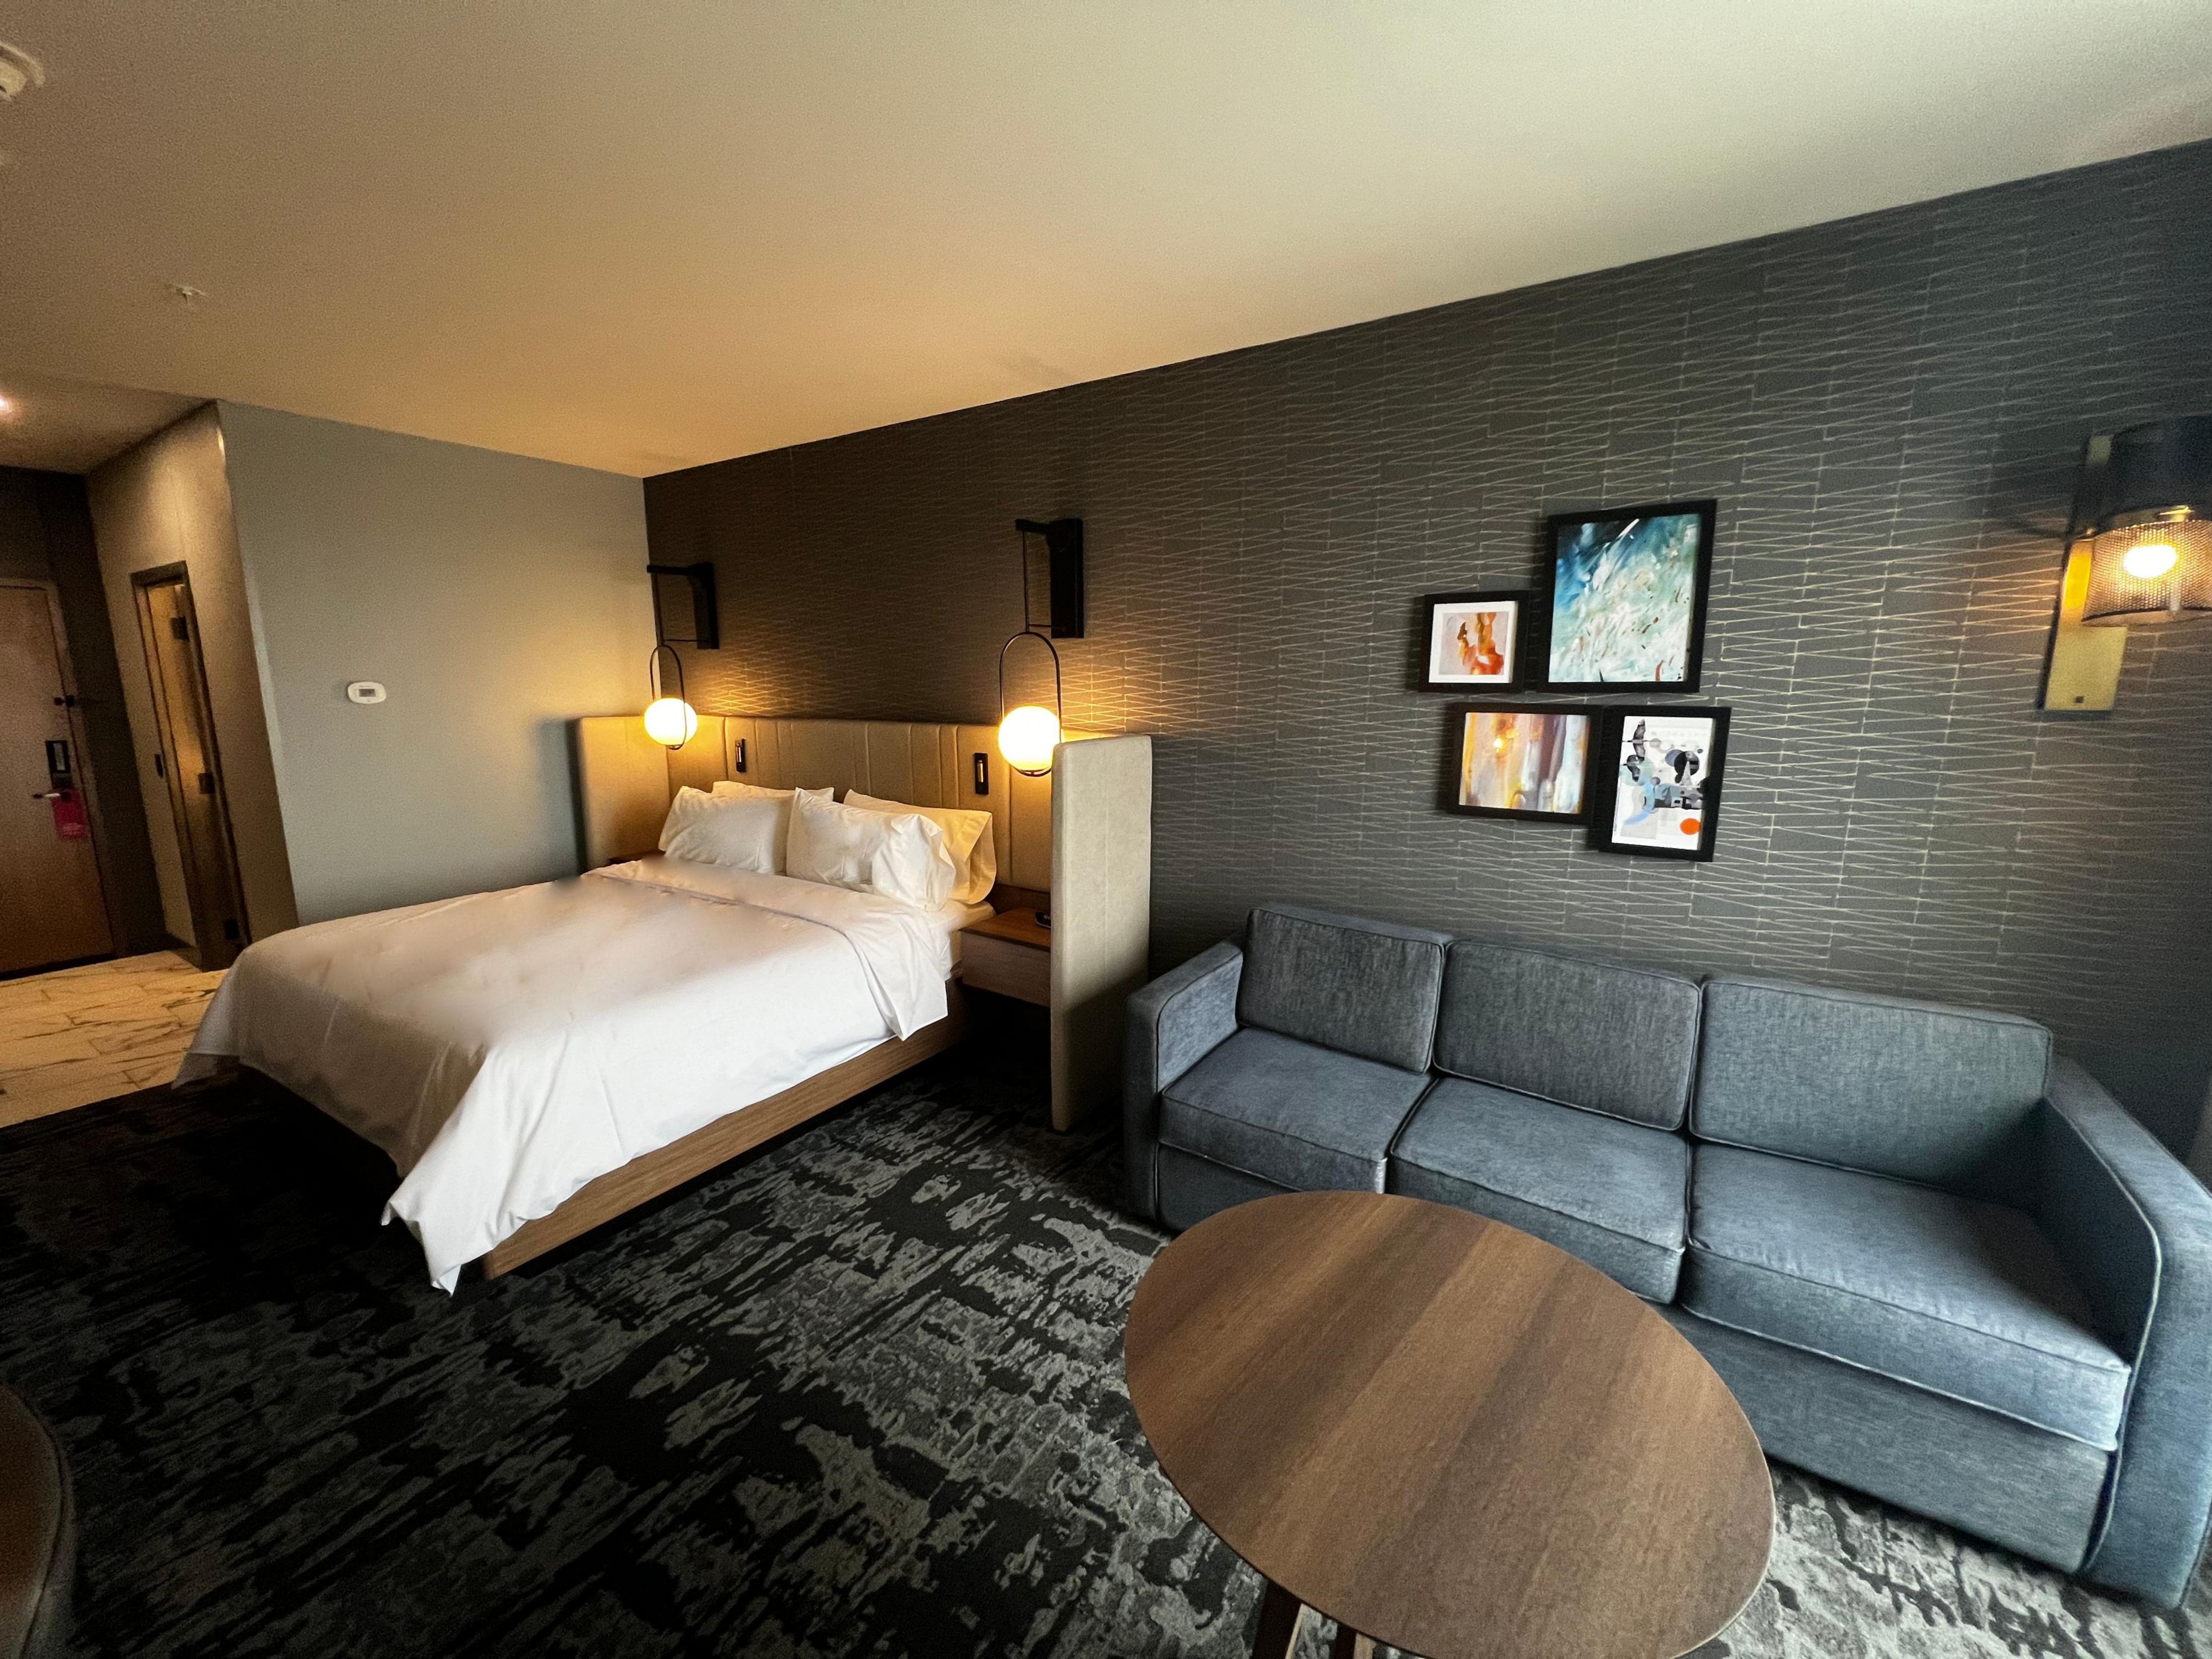 Wake up feeling refreshed and energized when staying at our recently inaugurated hotel in Kearney, NE. Each well-appointed guest room features plush beds outfitted with premium bedding, walk-in showers, and complimentary Wi-Fi. After visiting the waterpark, enjoy a delectable meal at our restaurant.